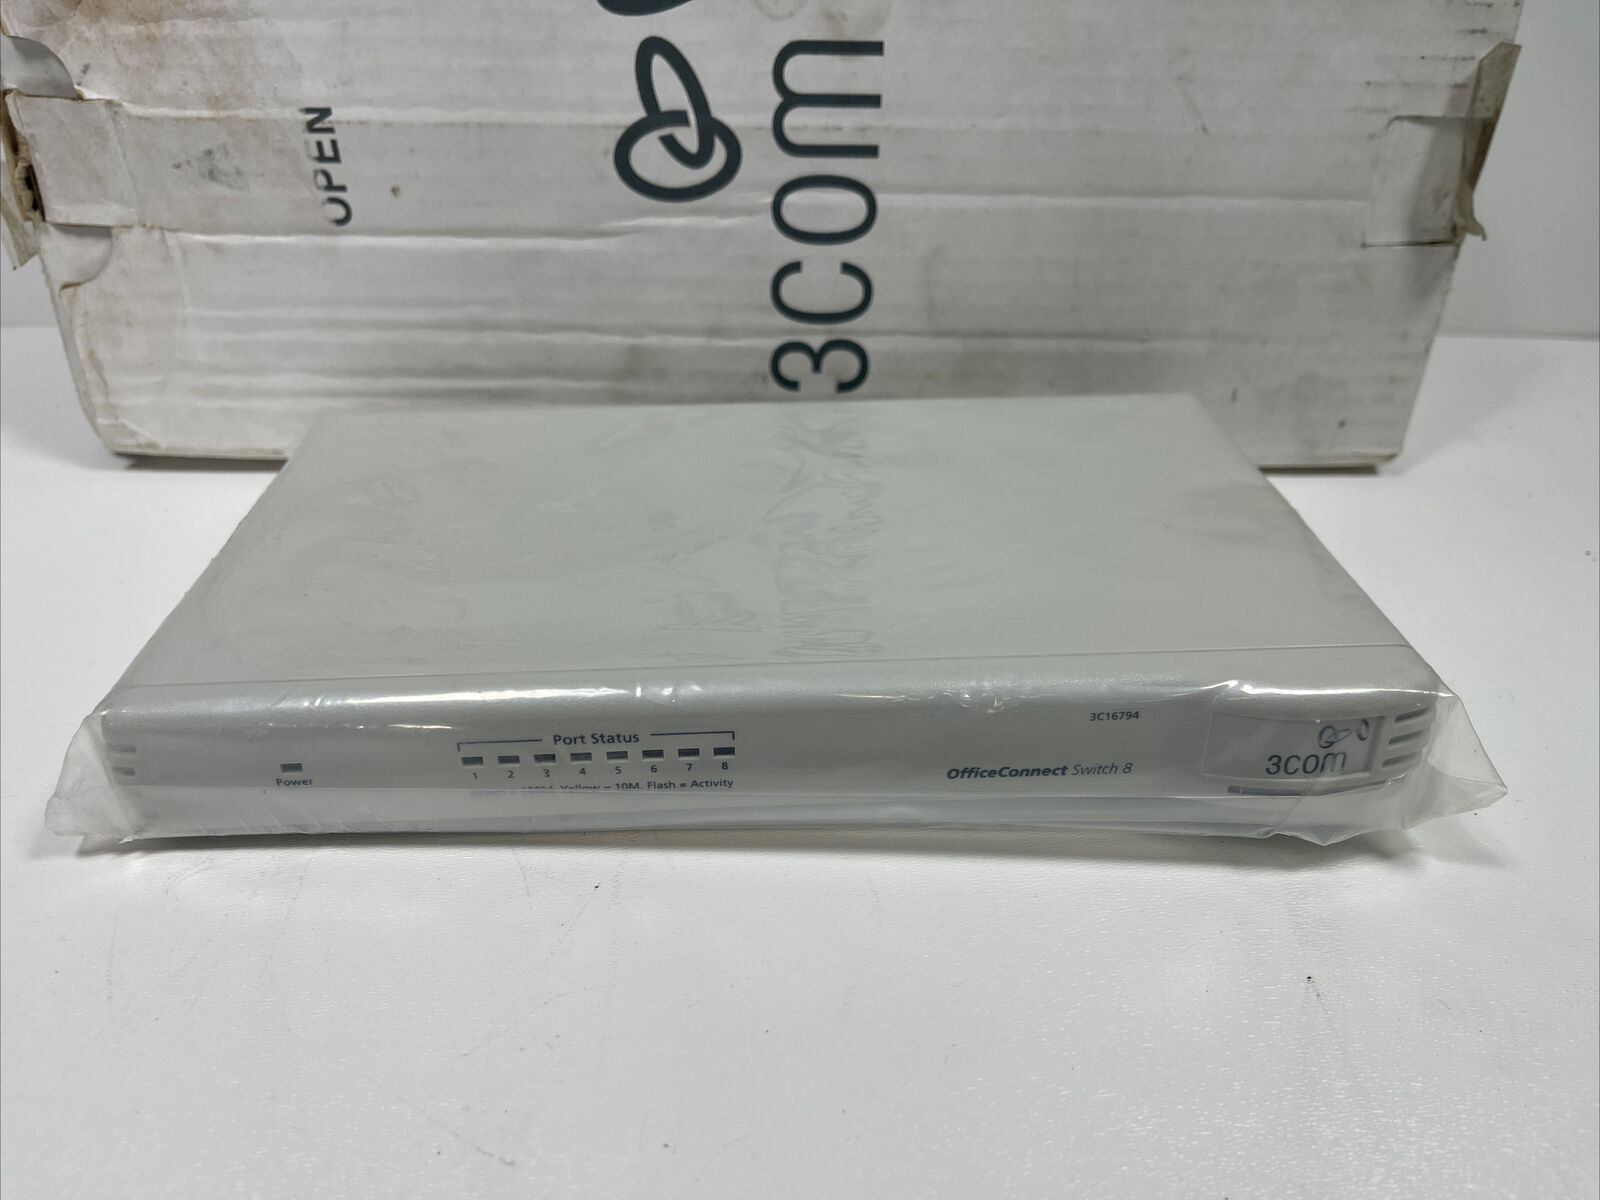 3Com 3C16794 OfficeConnect Managed Switch 8 NEW Open Box 